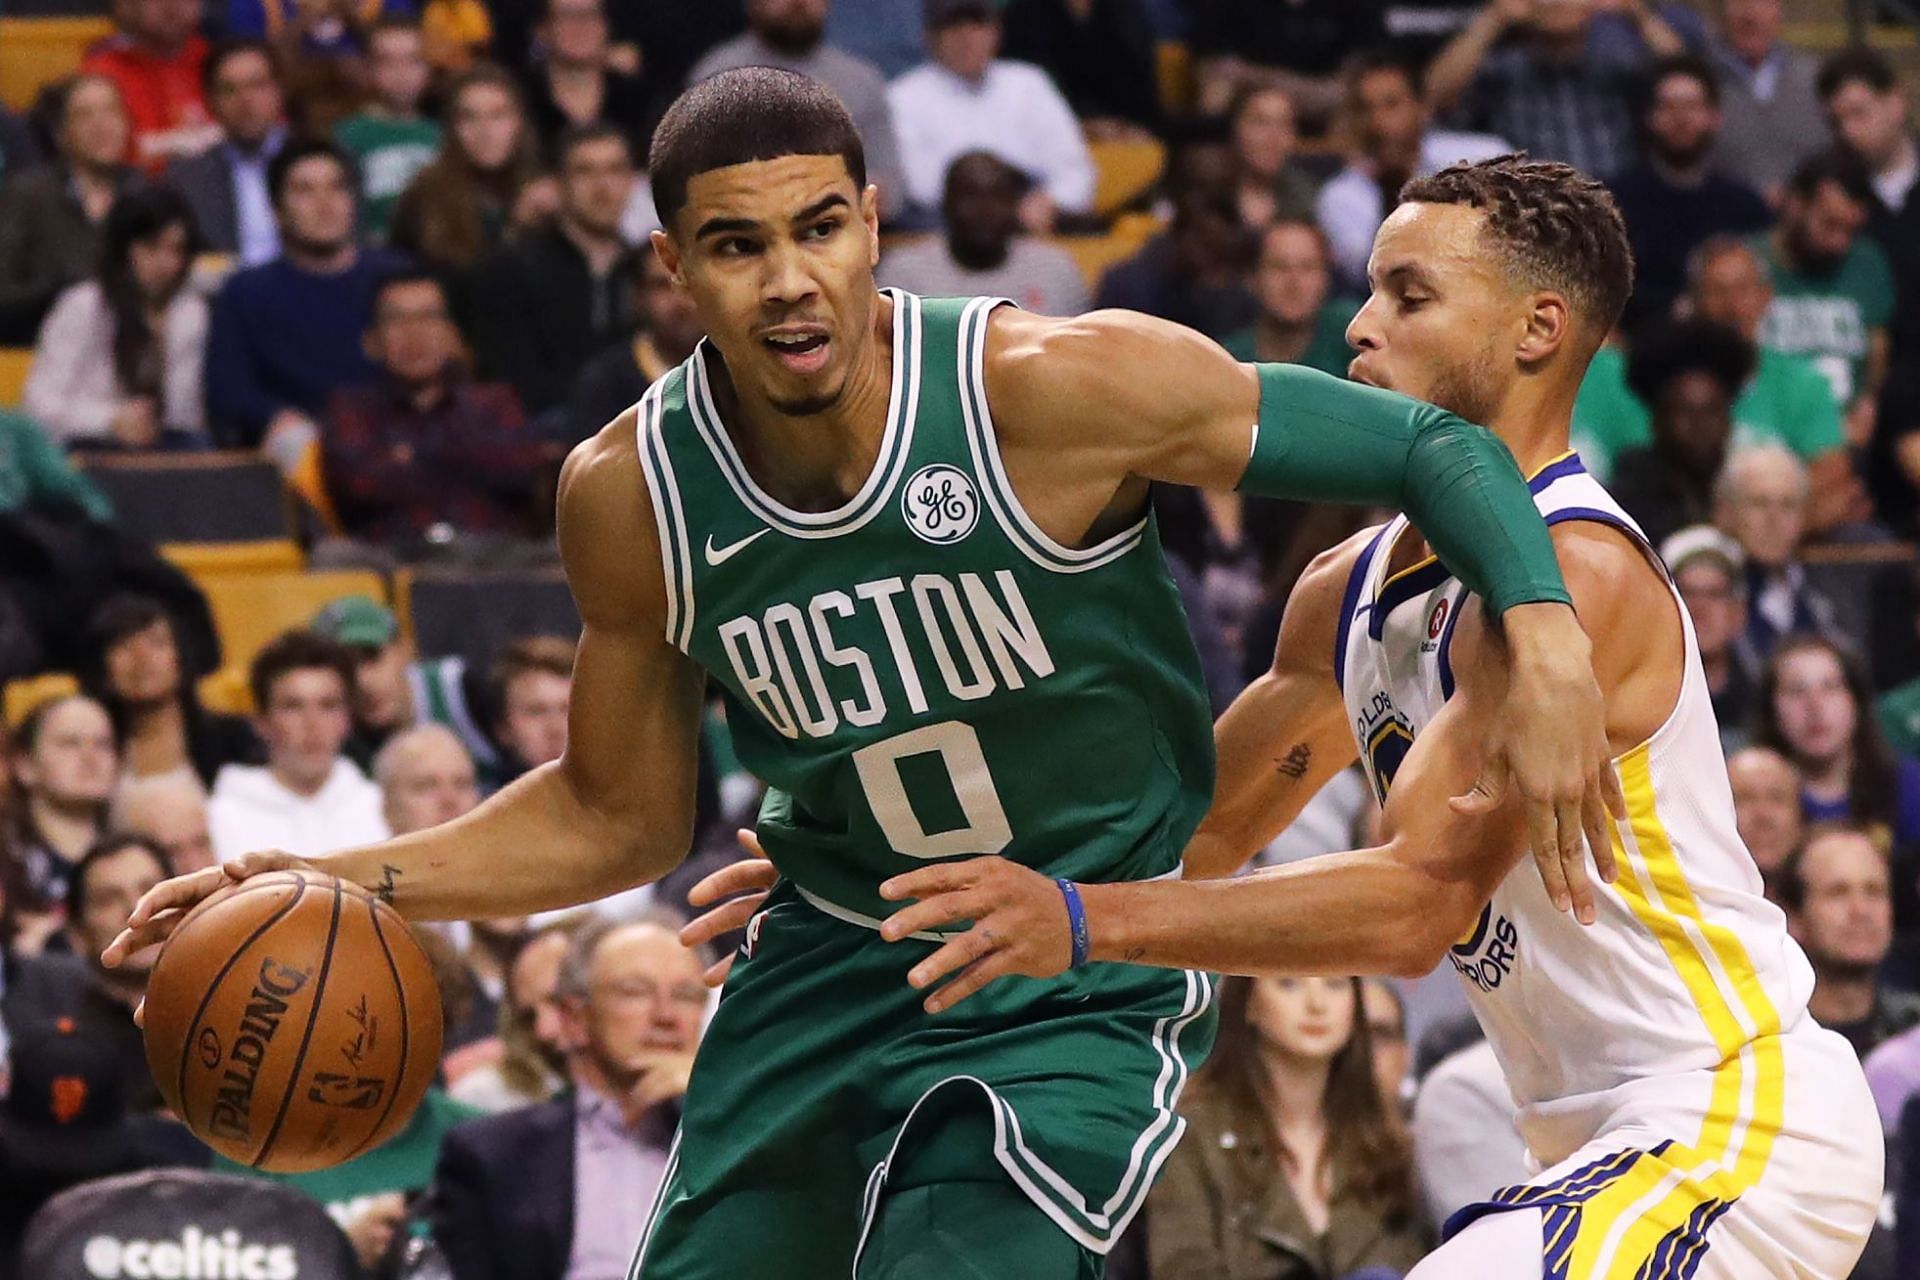 Steph Curry of the Golden State Warriors defends Jayson Tatum of the Boston Celtics in 2017.